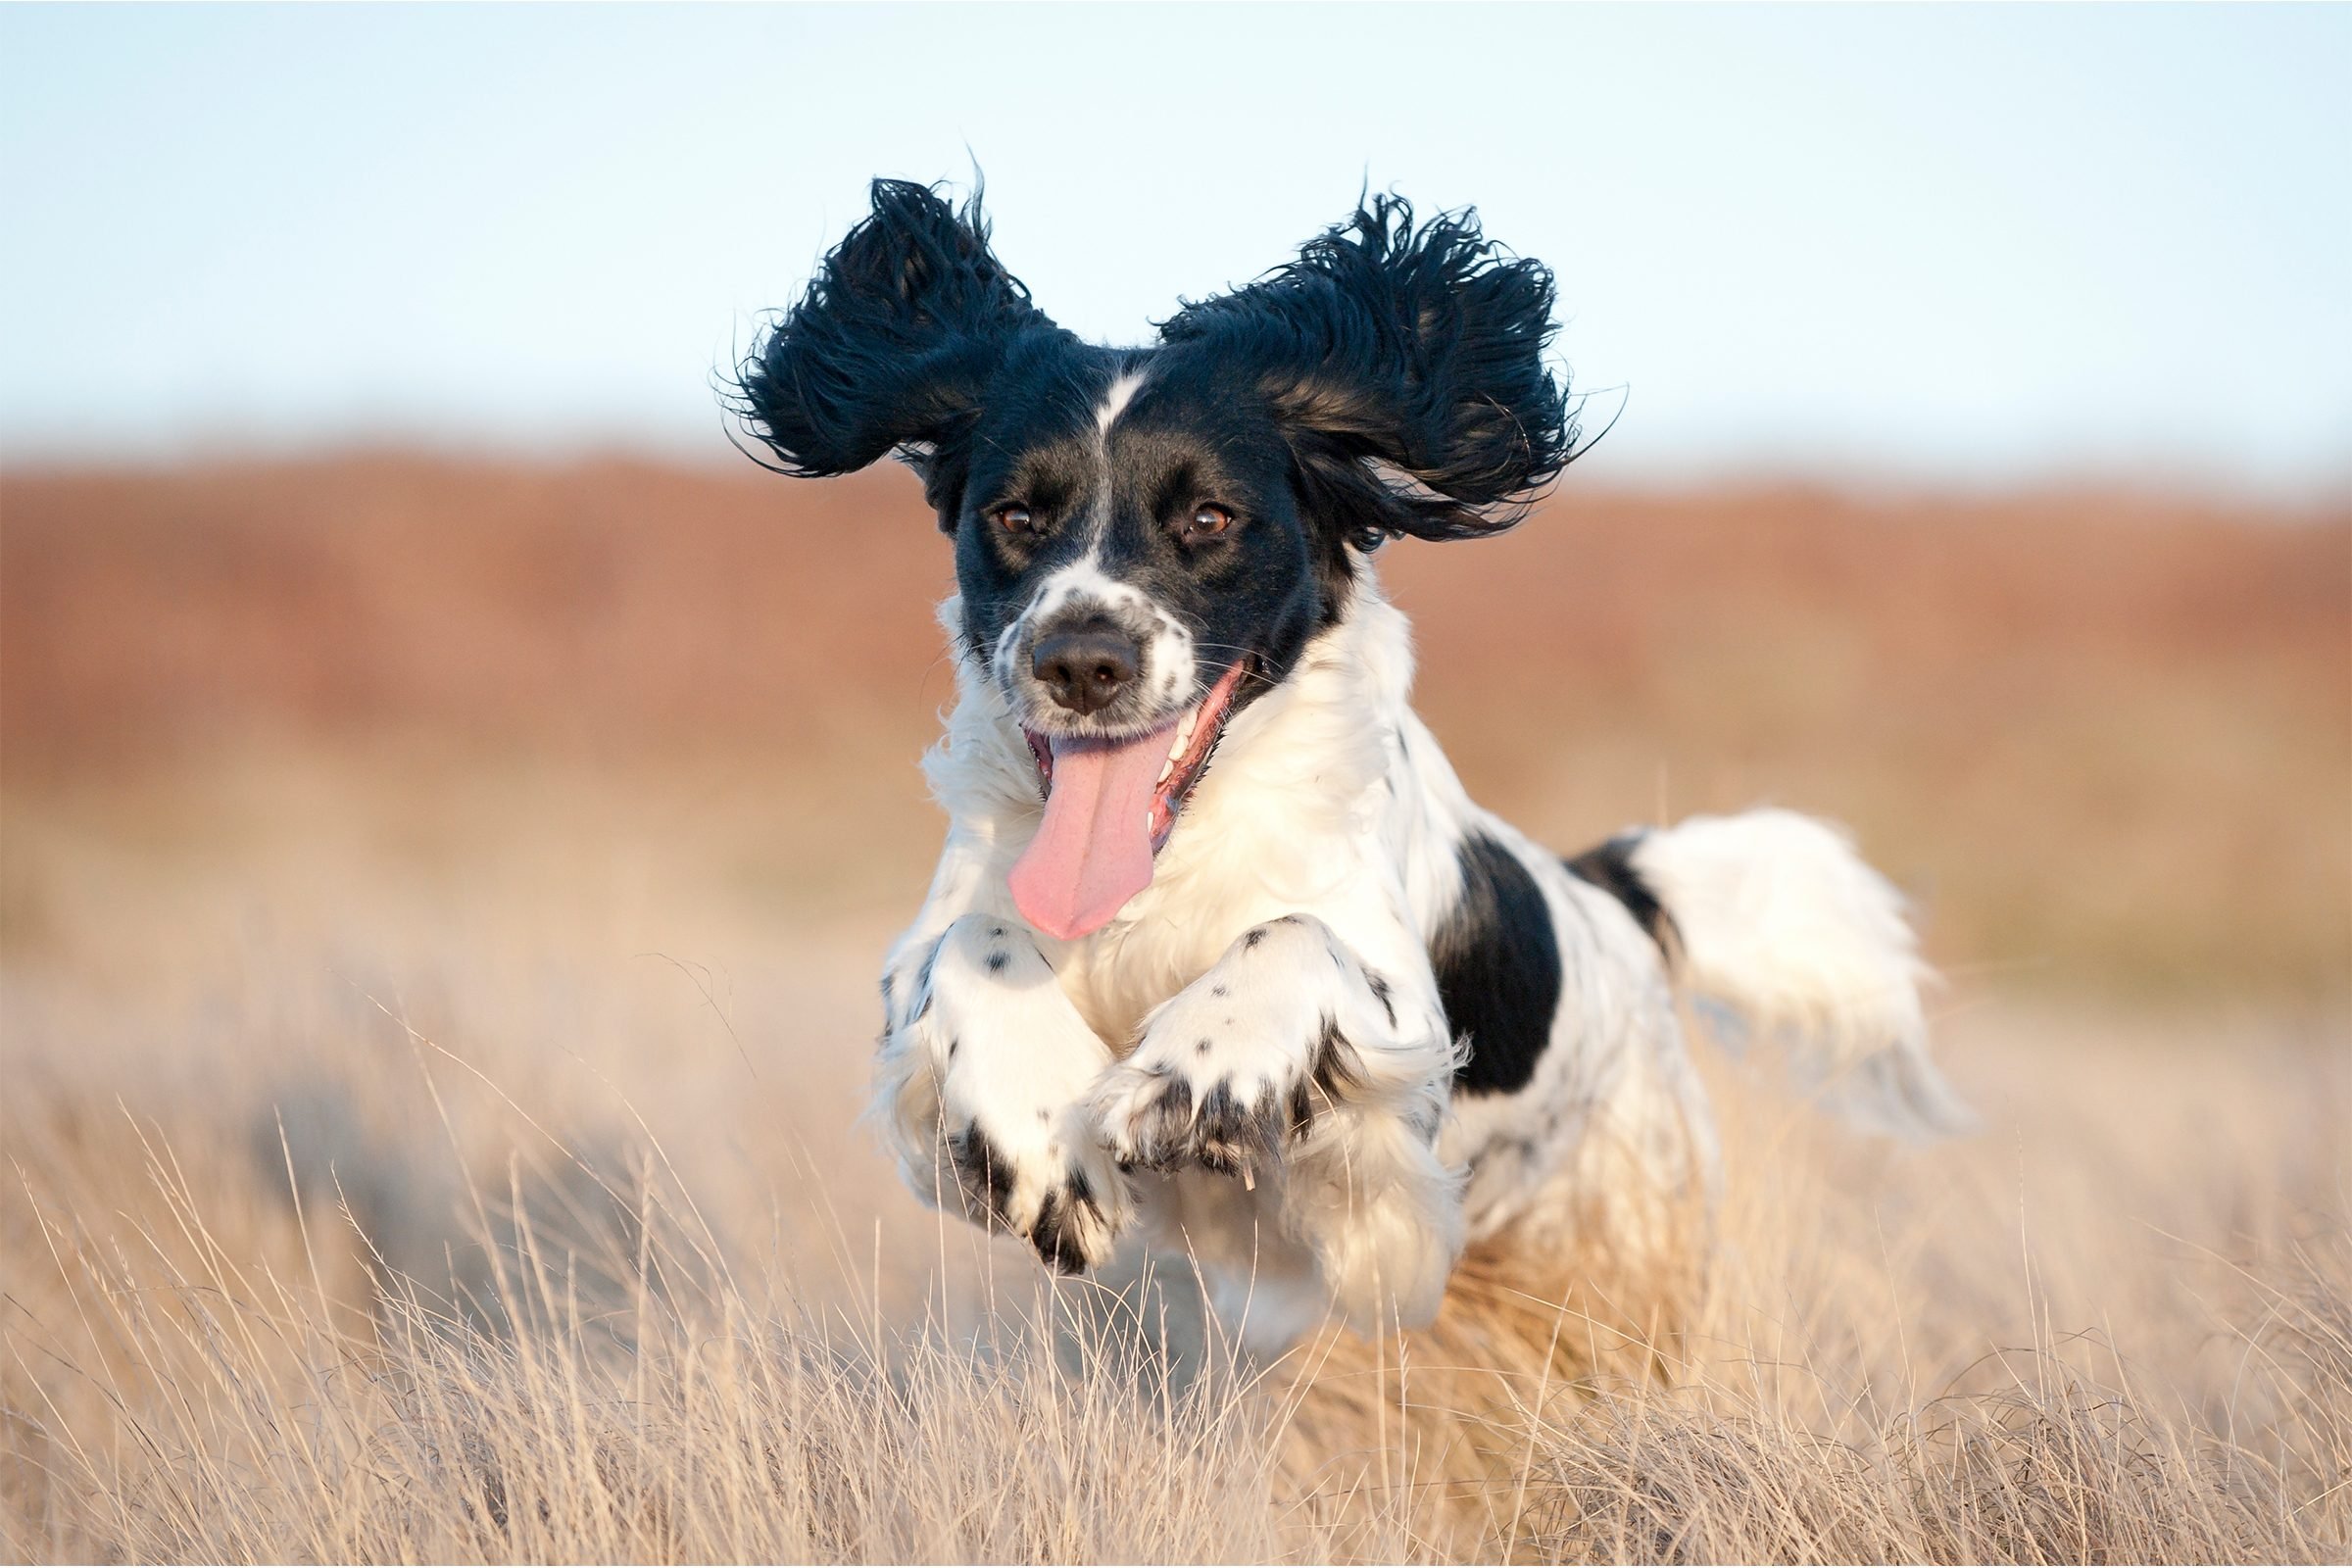 12 Dogs with Floppy Ears With Pictures | Reader's Digest